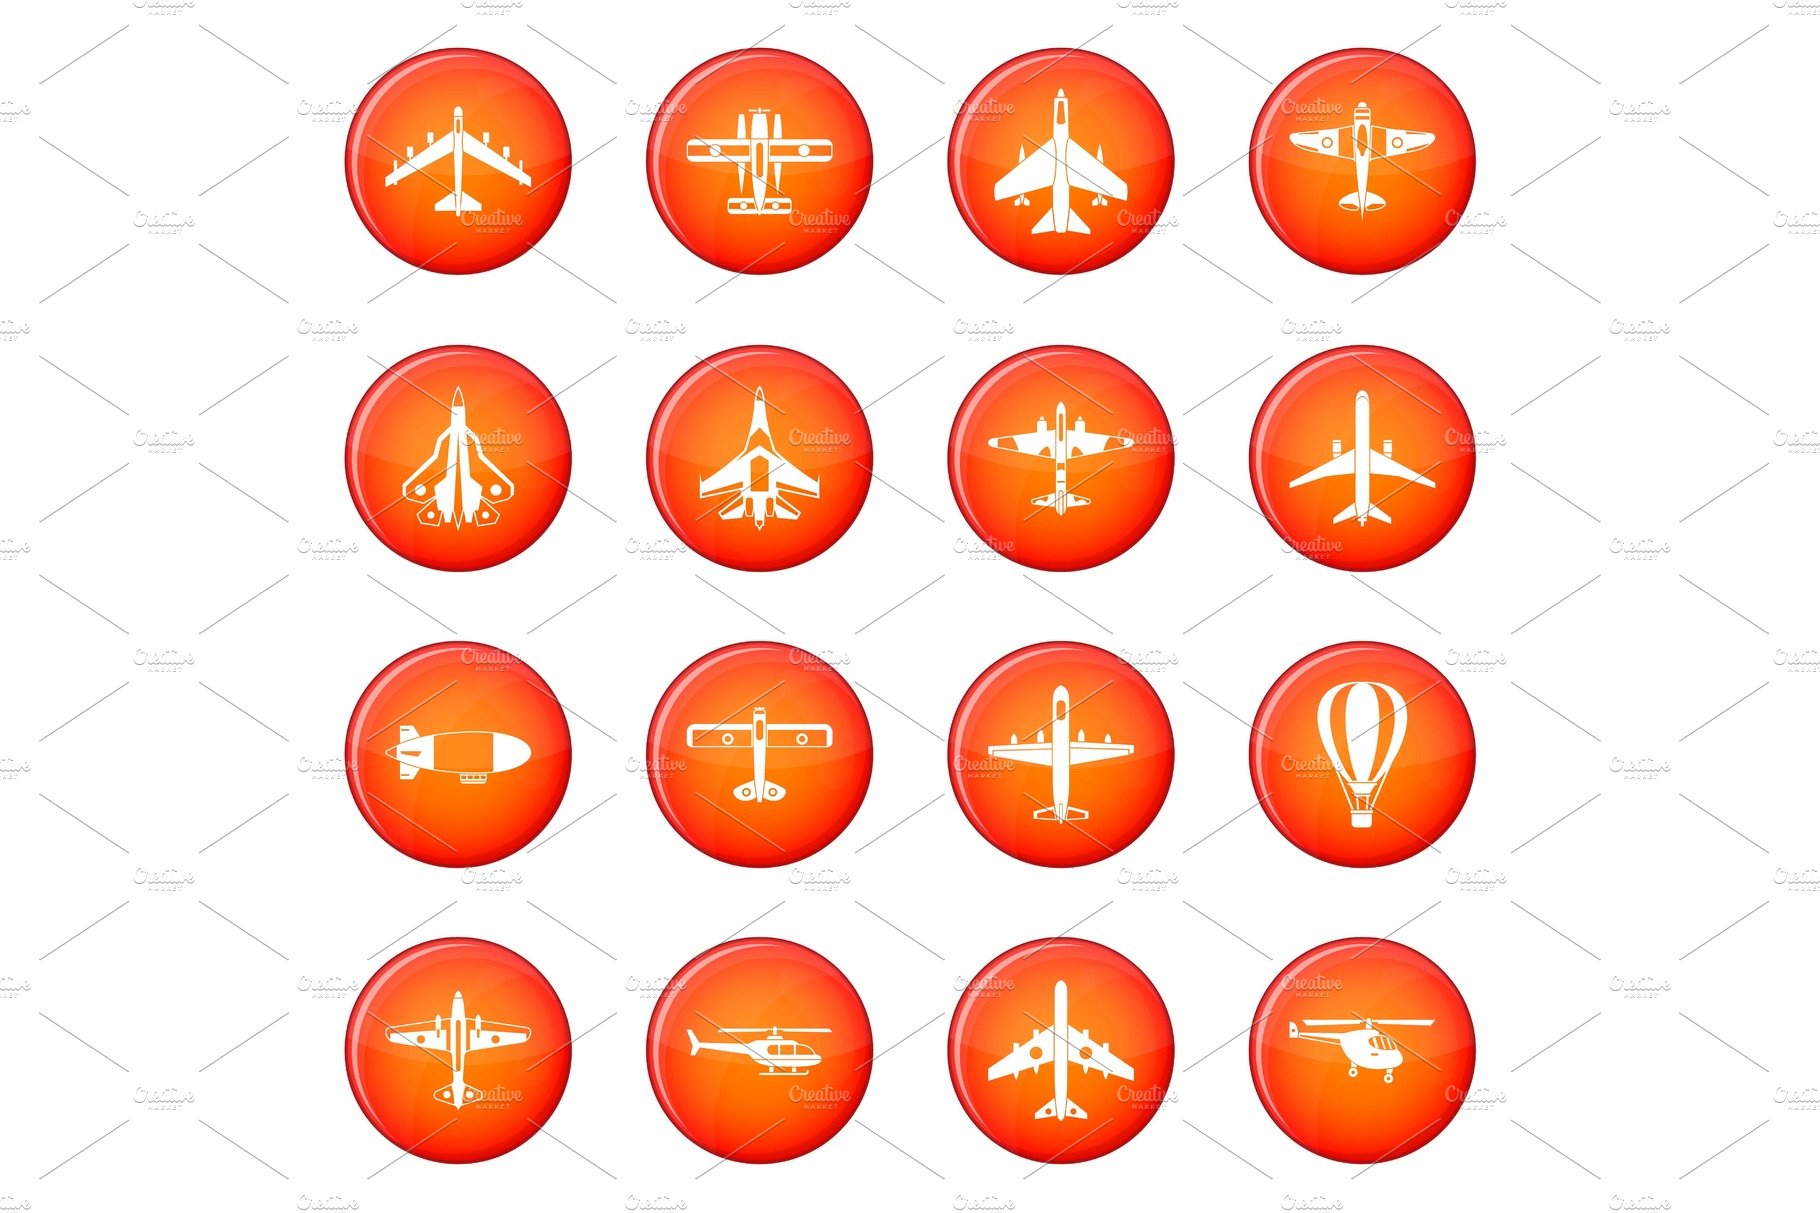 Aviation icons vector set cover image.